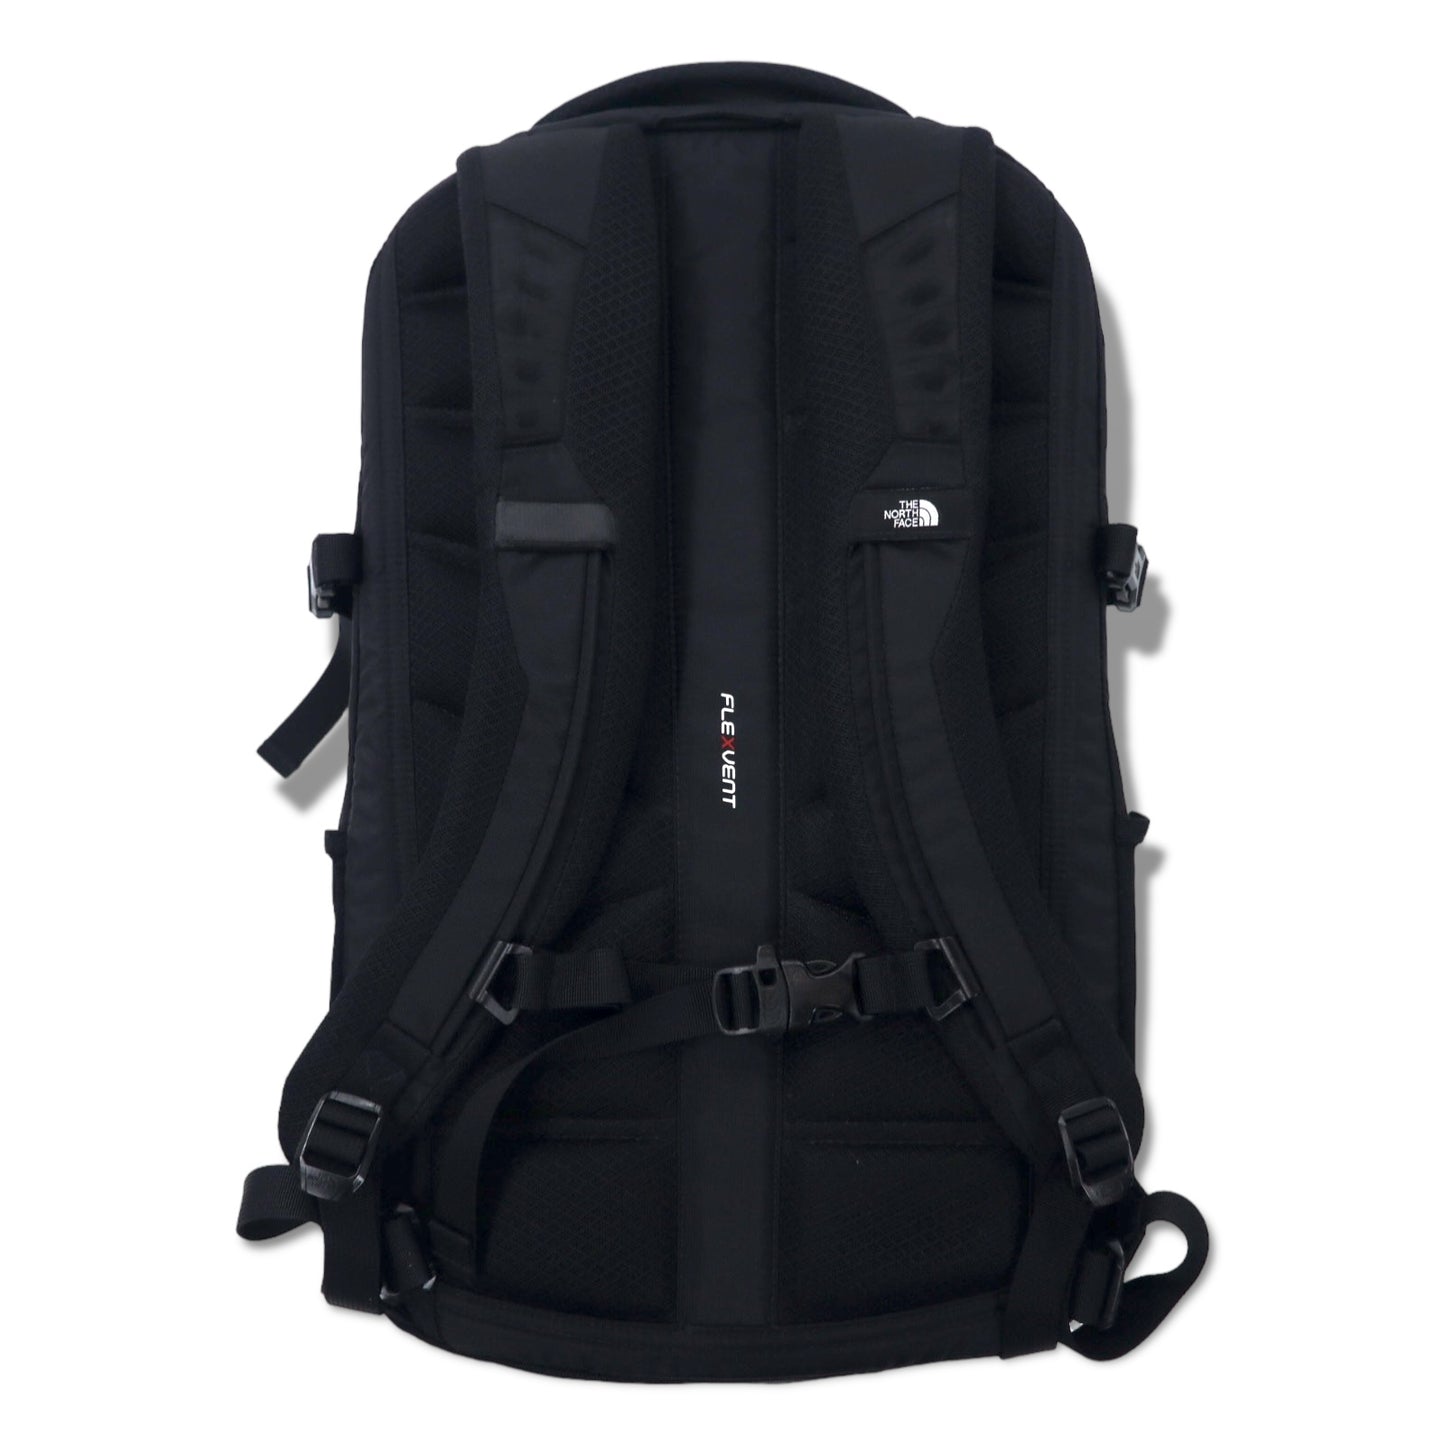 THE NORTH FACE アイアンピーク バックパック リュックサック ブラック ナイロン IRON PEAK NF0A2RD7